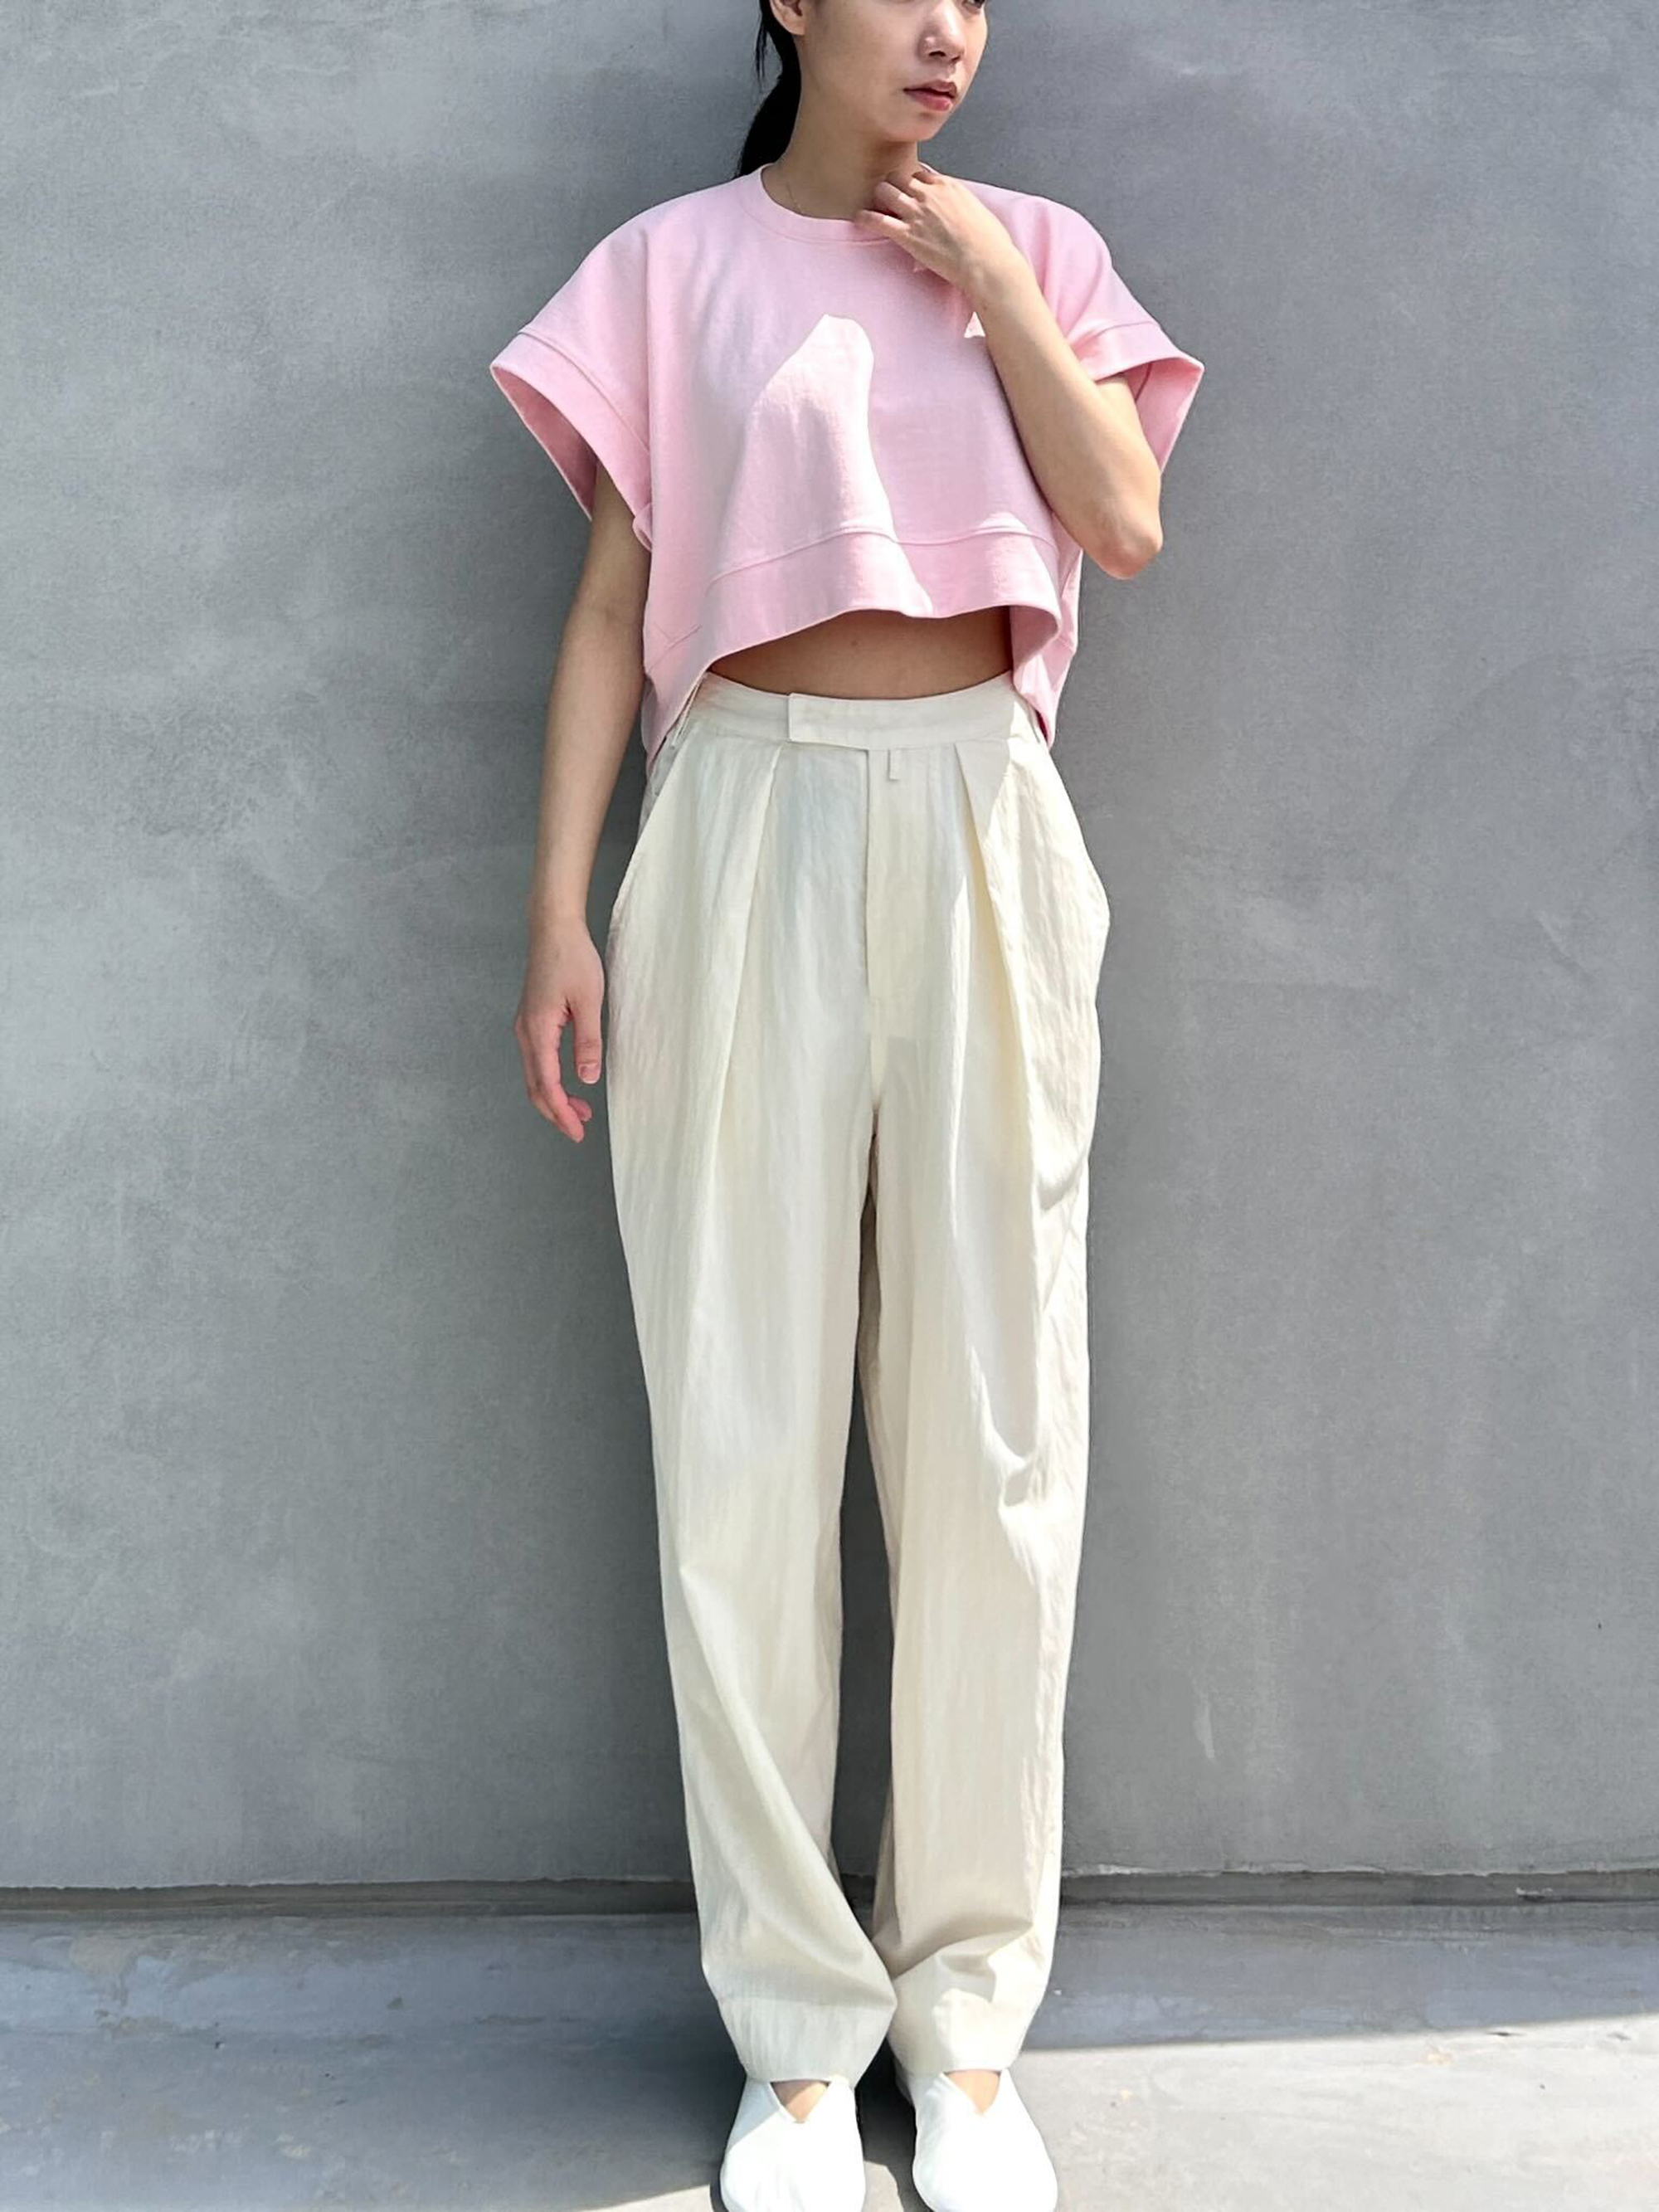 Awesome Cropped T-shirts With Pink